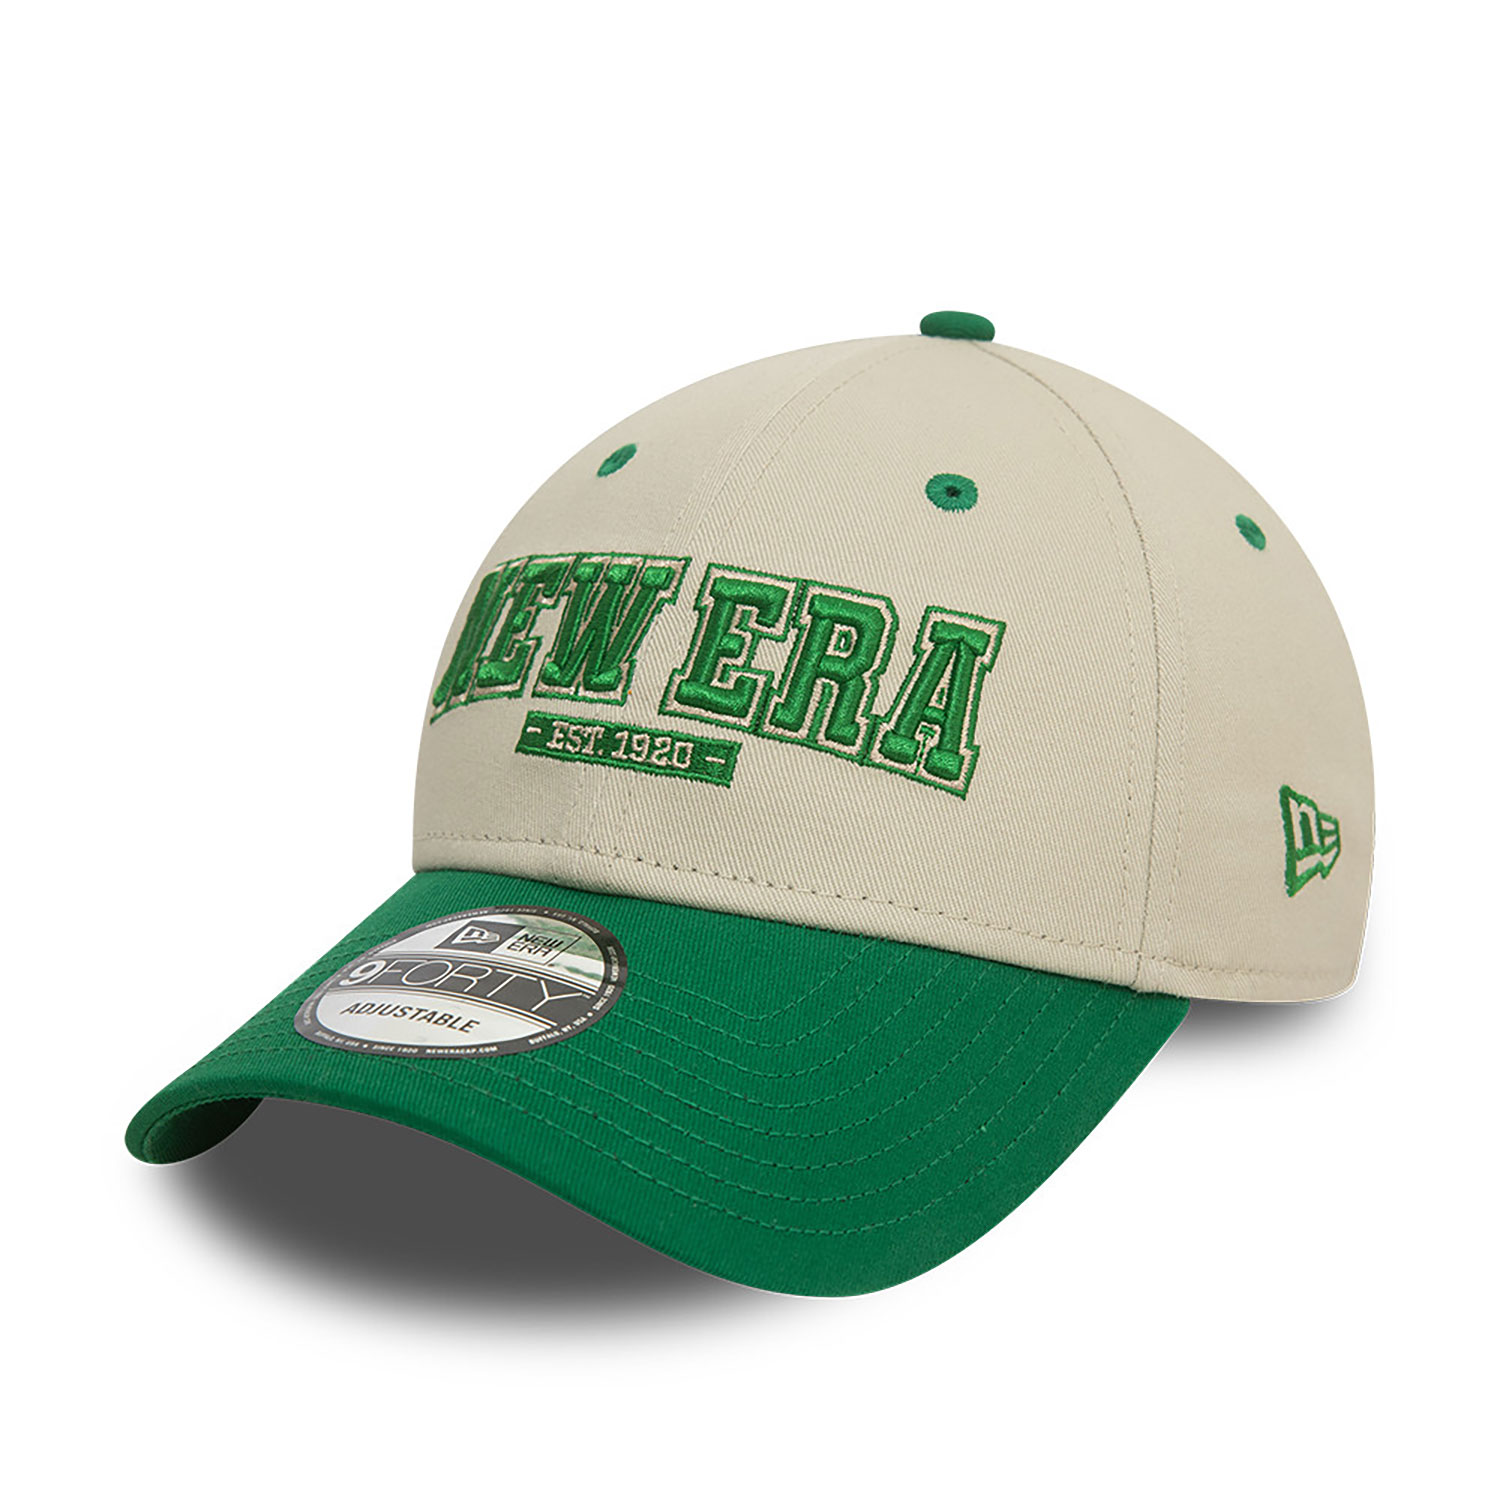 New Era Script Contrast Stone and Green 9FORTY Adjustable Cap